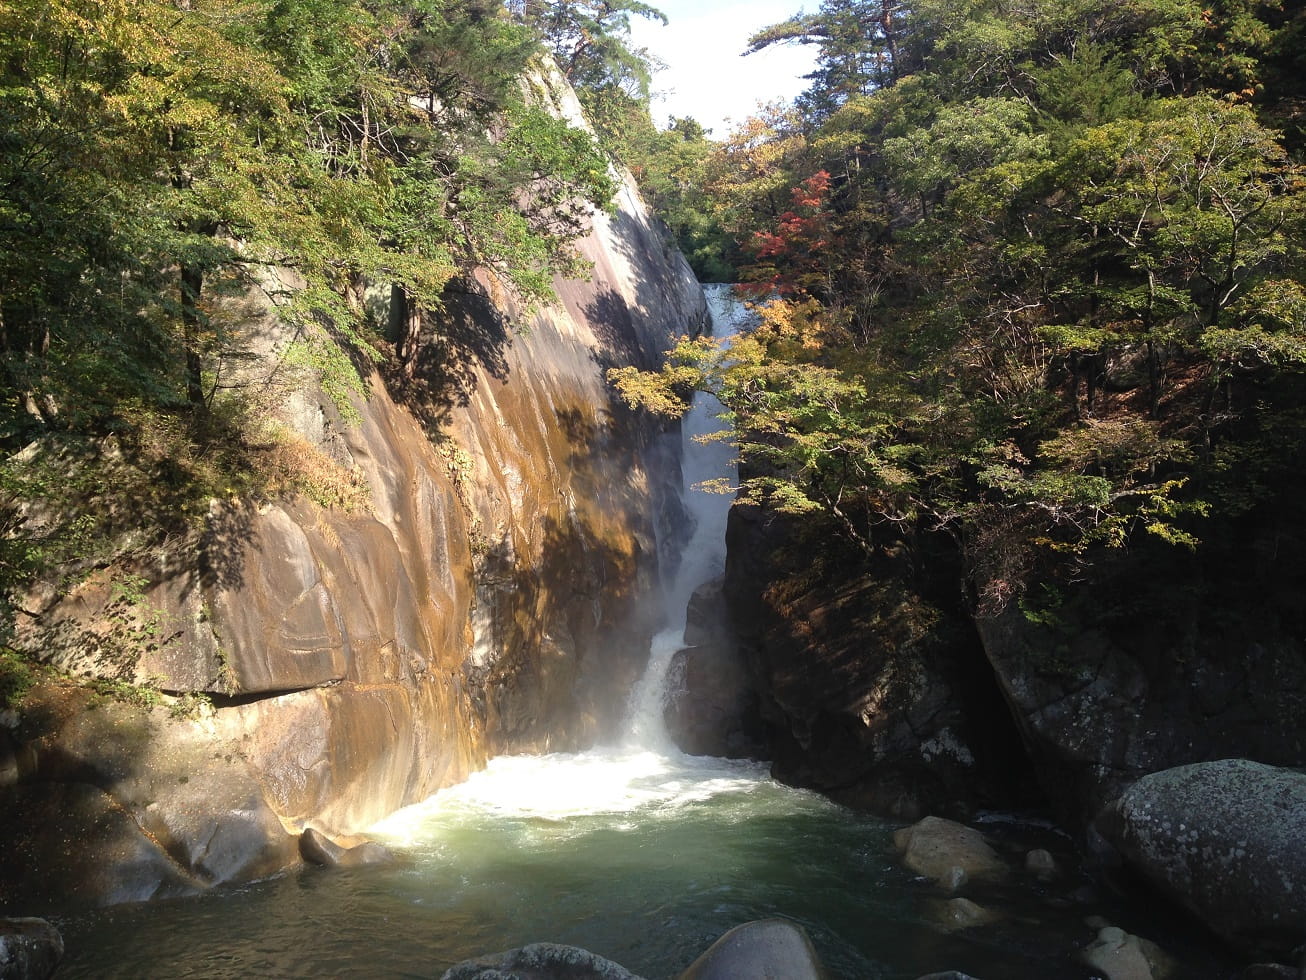 Hear the sounds and see the sights of unfiltered nature by hiking the picturesque trails of Yamanashi’s Shosenkyo Gorge.